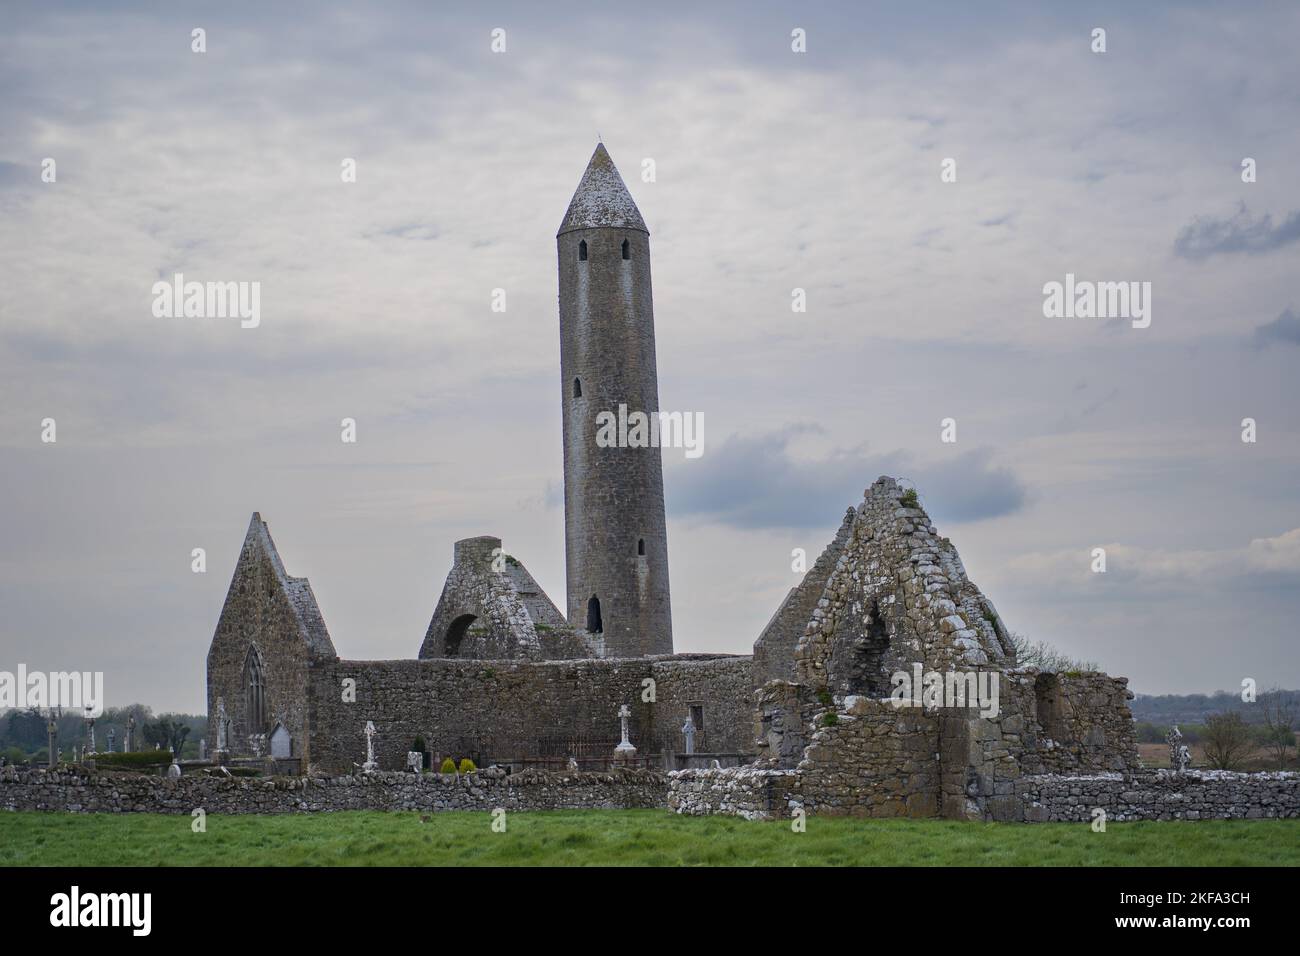 The cloudy sky over the Kilmacduagh monastery in south County Galway, near Gort, Ireland Stock Photo